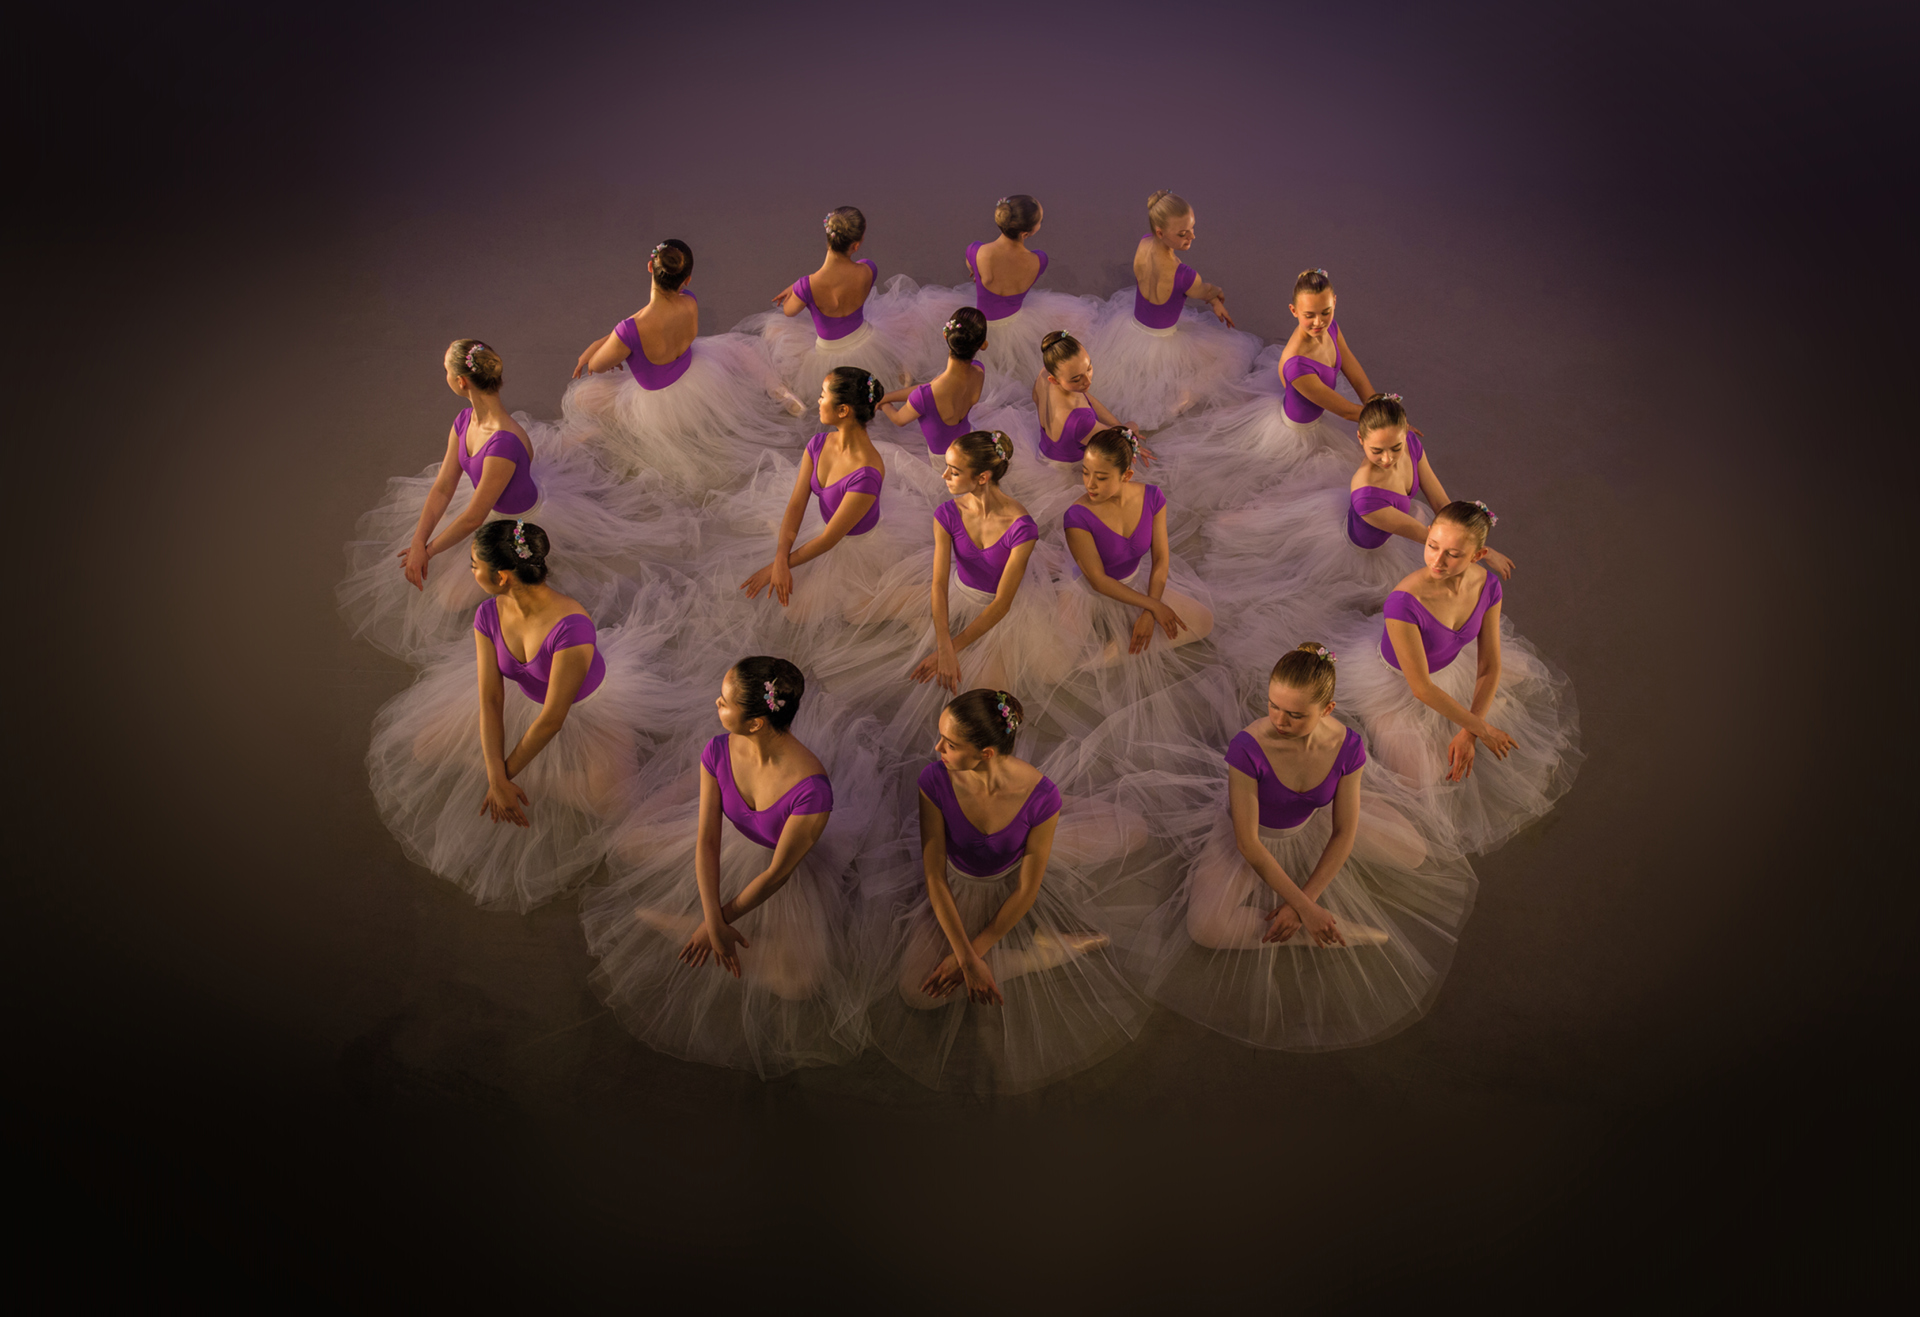 seventeen female sitting dancers with hands over kneed wearing purple leotards and large white tutus in two circles